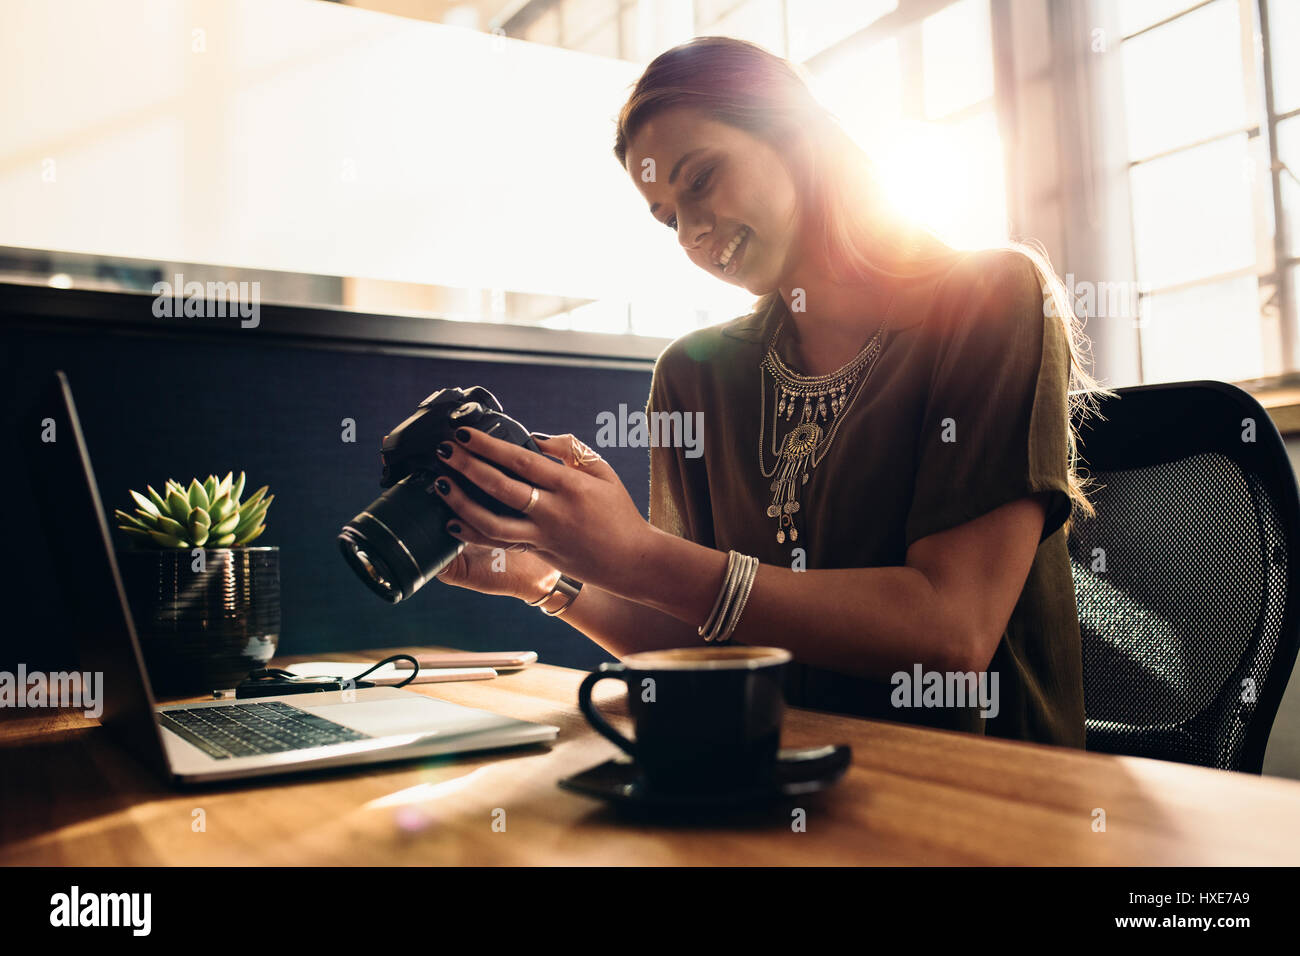 Young female vlogger looking at camera while working on laptop. Photographer with her camera and laptop on her desk. Stock Photo